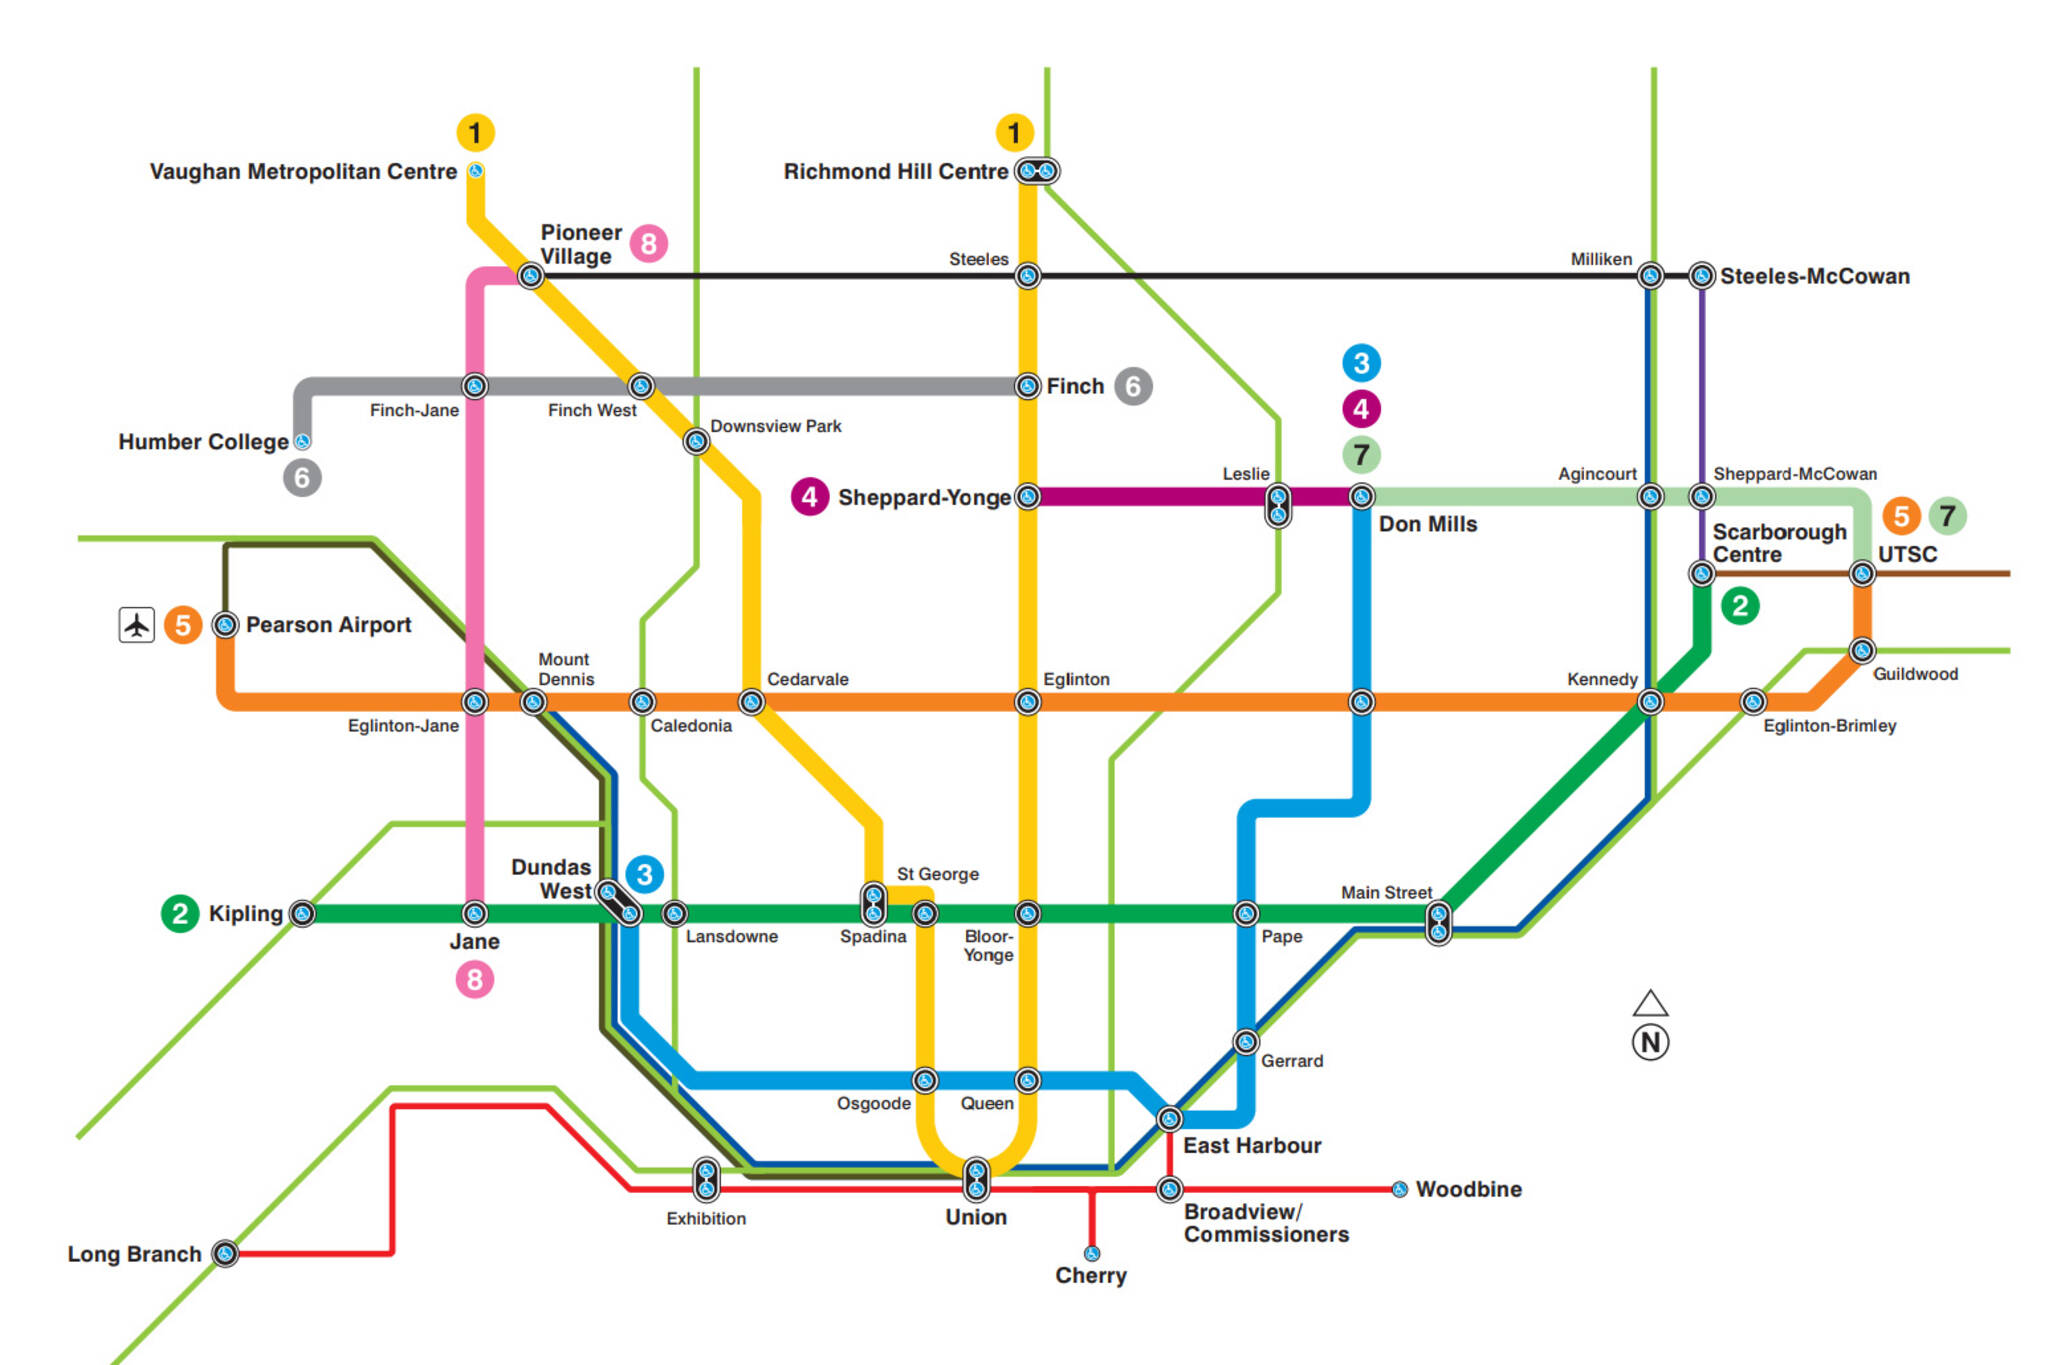 This is what the TTC's future transit map looks like